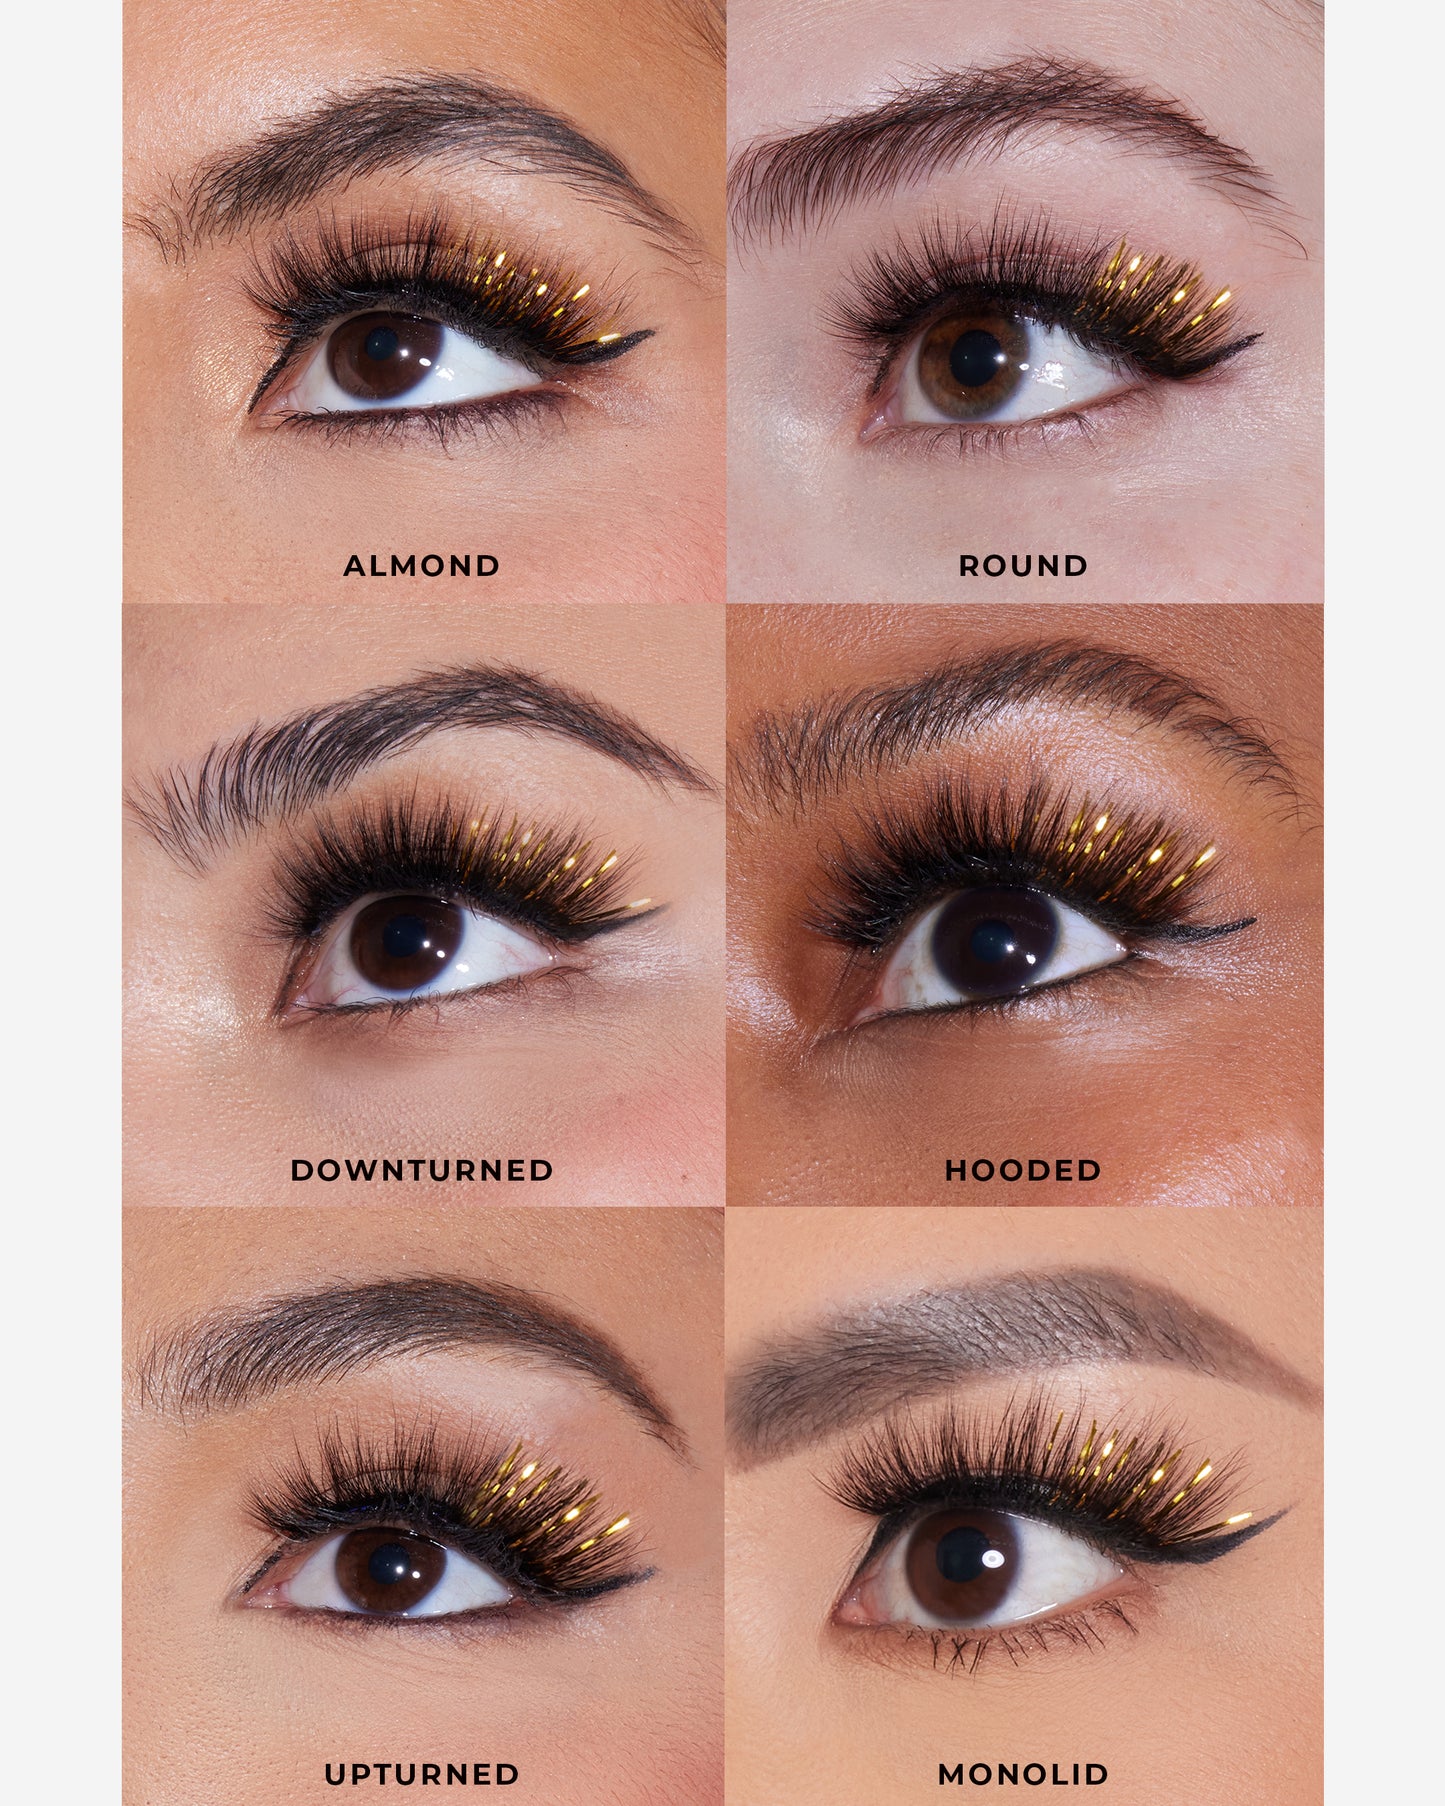 Life of the Party Tinsel Lash